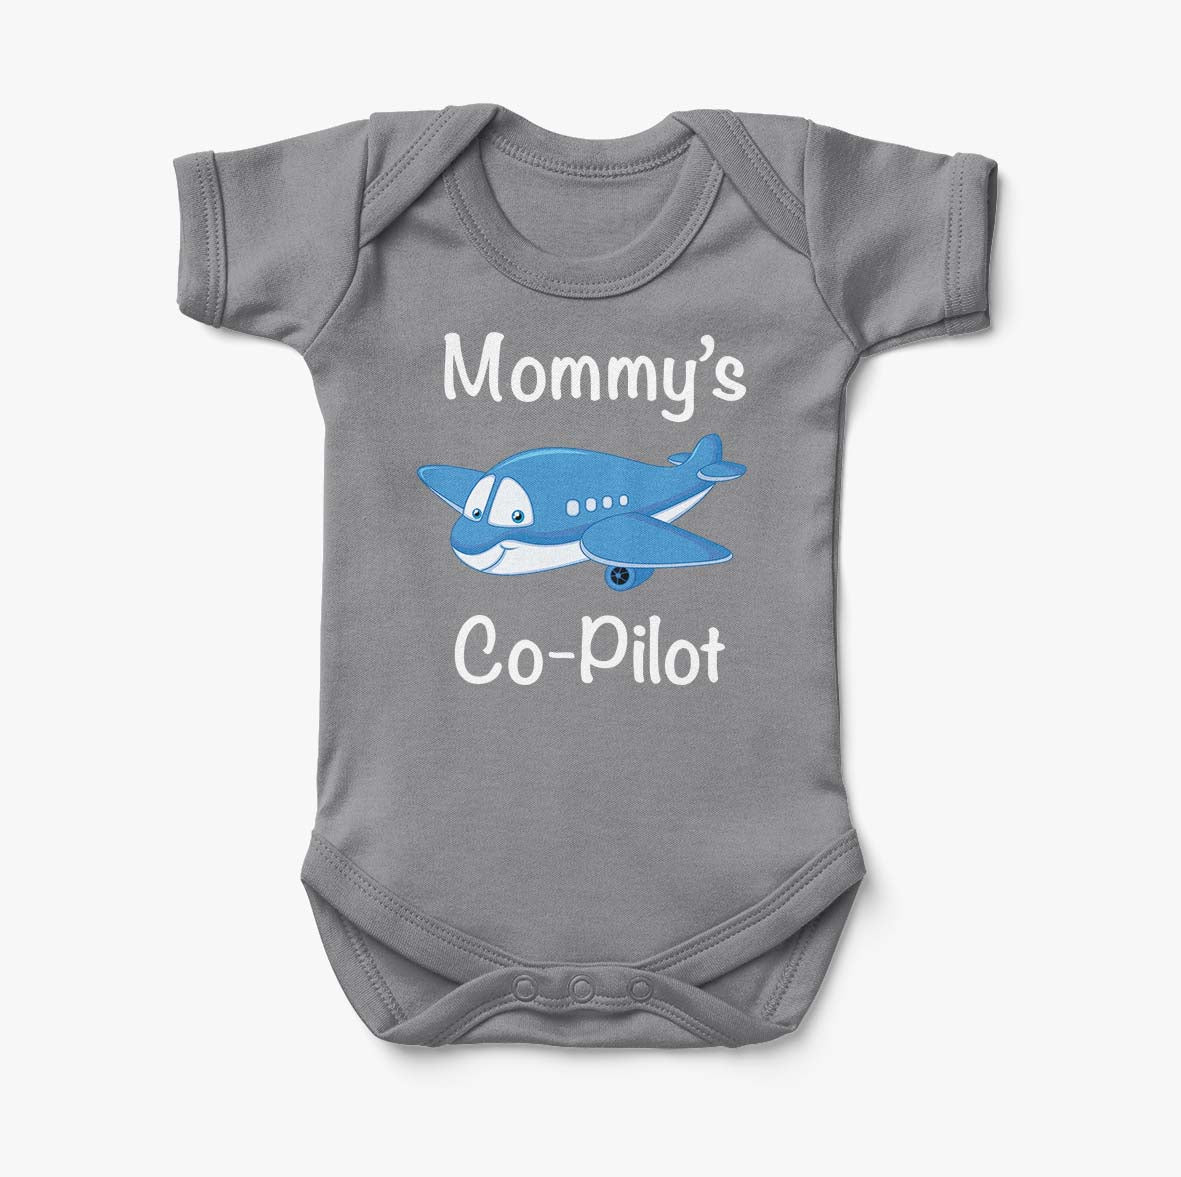 Mommy's Co-Pilot (Jet Airplane) Designed Baby Bodysuits